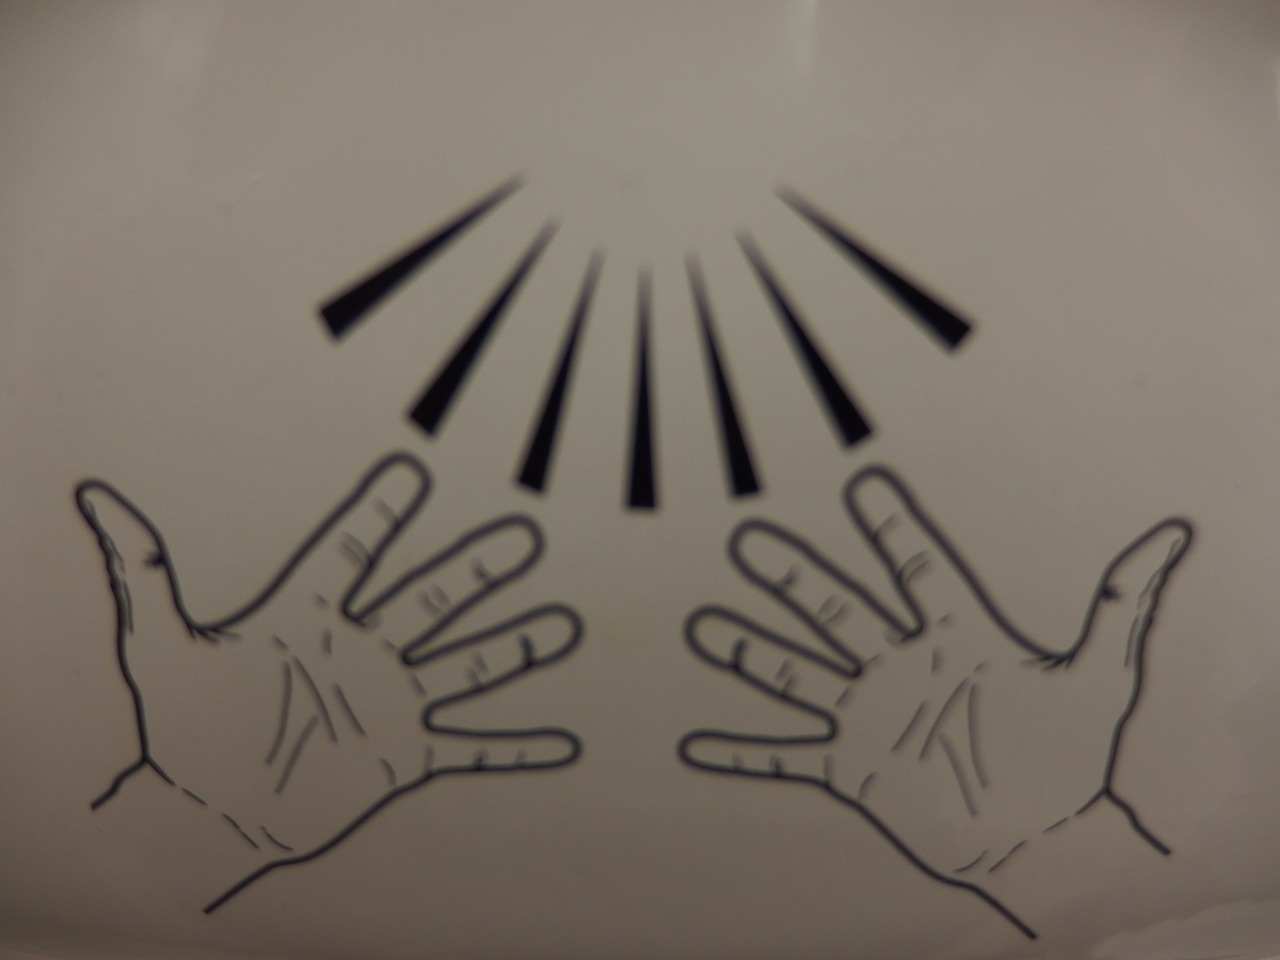 <p>Symbol for life or hand dryer?</p><p><a href="http://www.howdowesing.net">www.howdowesing.net</a></p><p><a href="https://www.youtube.com/channel/UCRQSjvKVzDmj2JhBXzzSjVQ"><b><i>How Do We Sing?</i></b></a></p><p><a href="https://vimeo.com/howdowesing"><b><i>HDWS Vimeo</i></b></a></p>